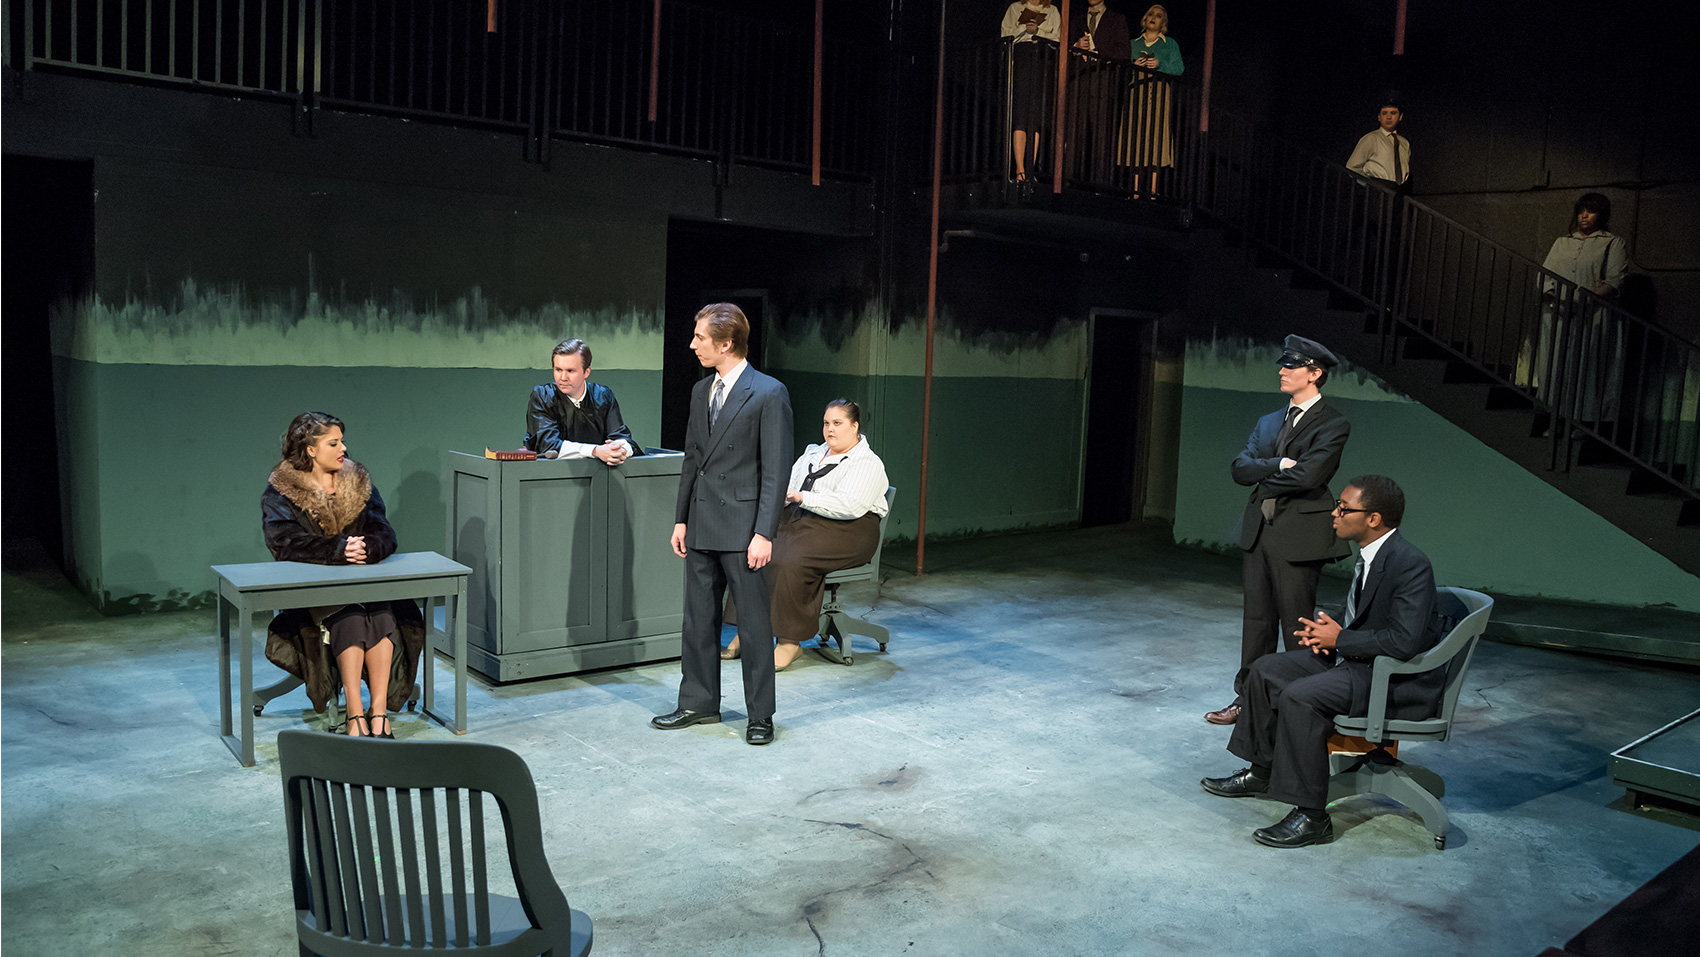 The stage  has been converted into a courthouse. The woman sits at a table, interrogated by a lawyer. The judge and other people look on.